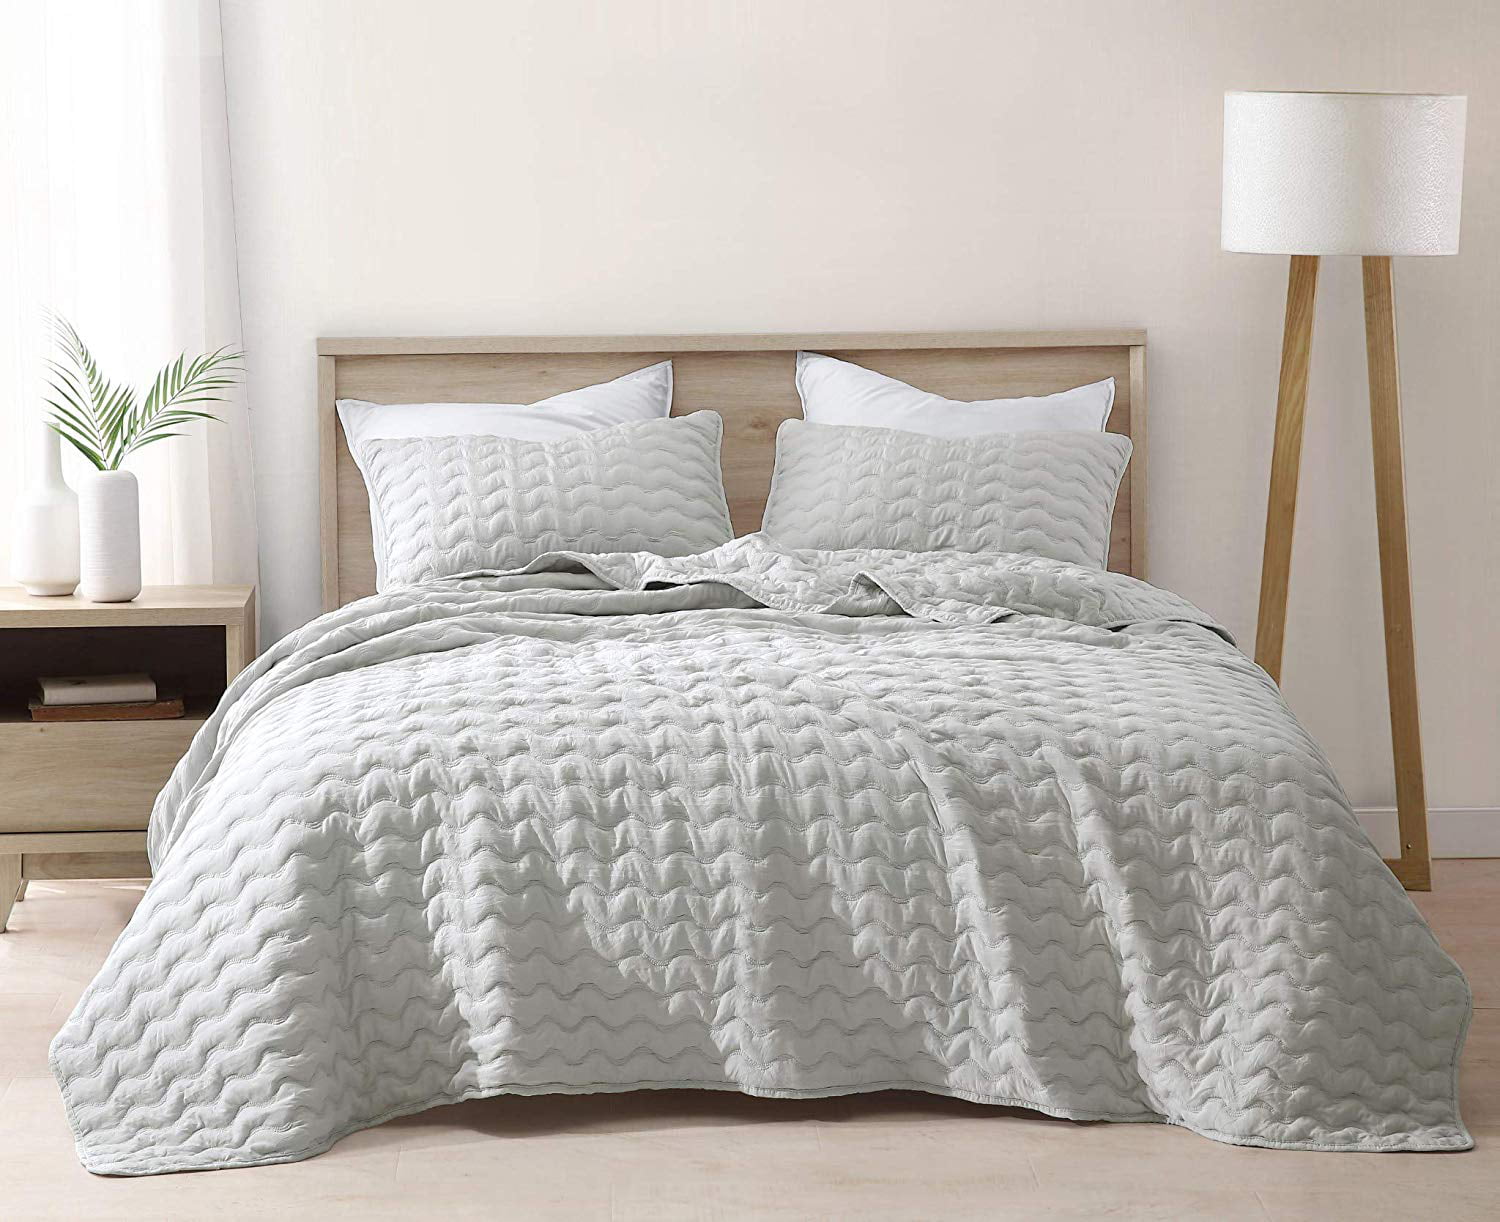 Chezmoi Collection Zoe 3-Piece Chevron Zig Zag Channel Quilted Bedspread Coverlet Set Gray, Queen